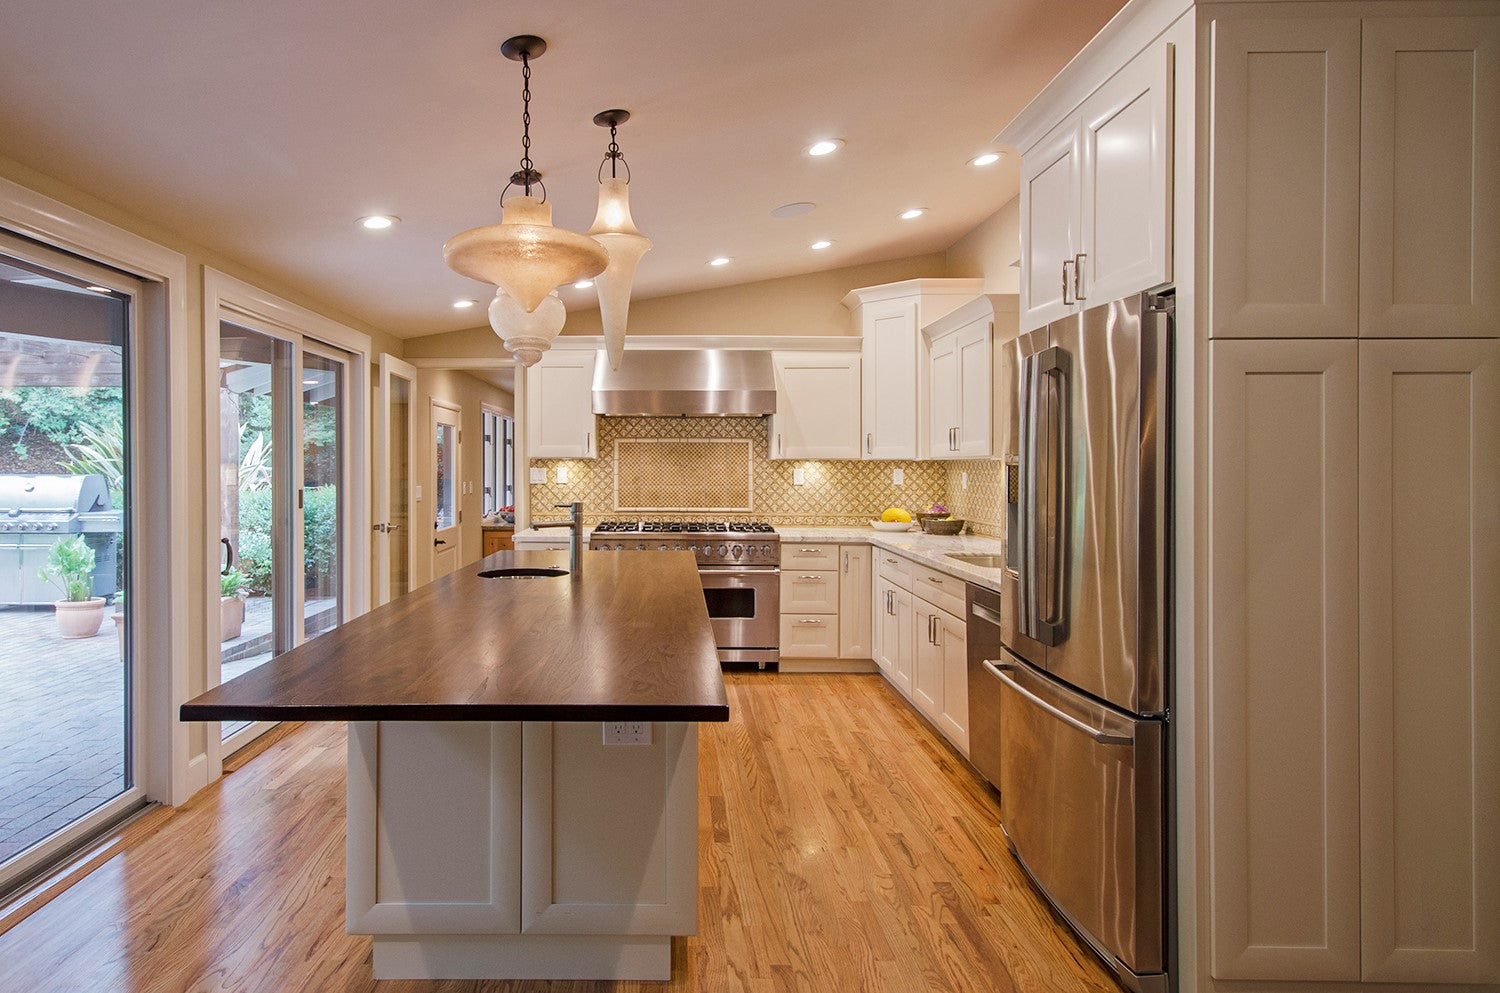 Remodeled Kitchen with White Painted Cabinets, Wood Countertop, Marble Countertop, Elaborate Backsplash and Assymetrical Pendant Lights